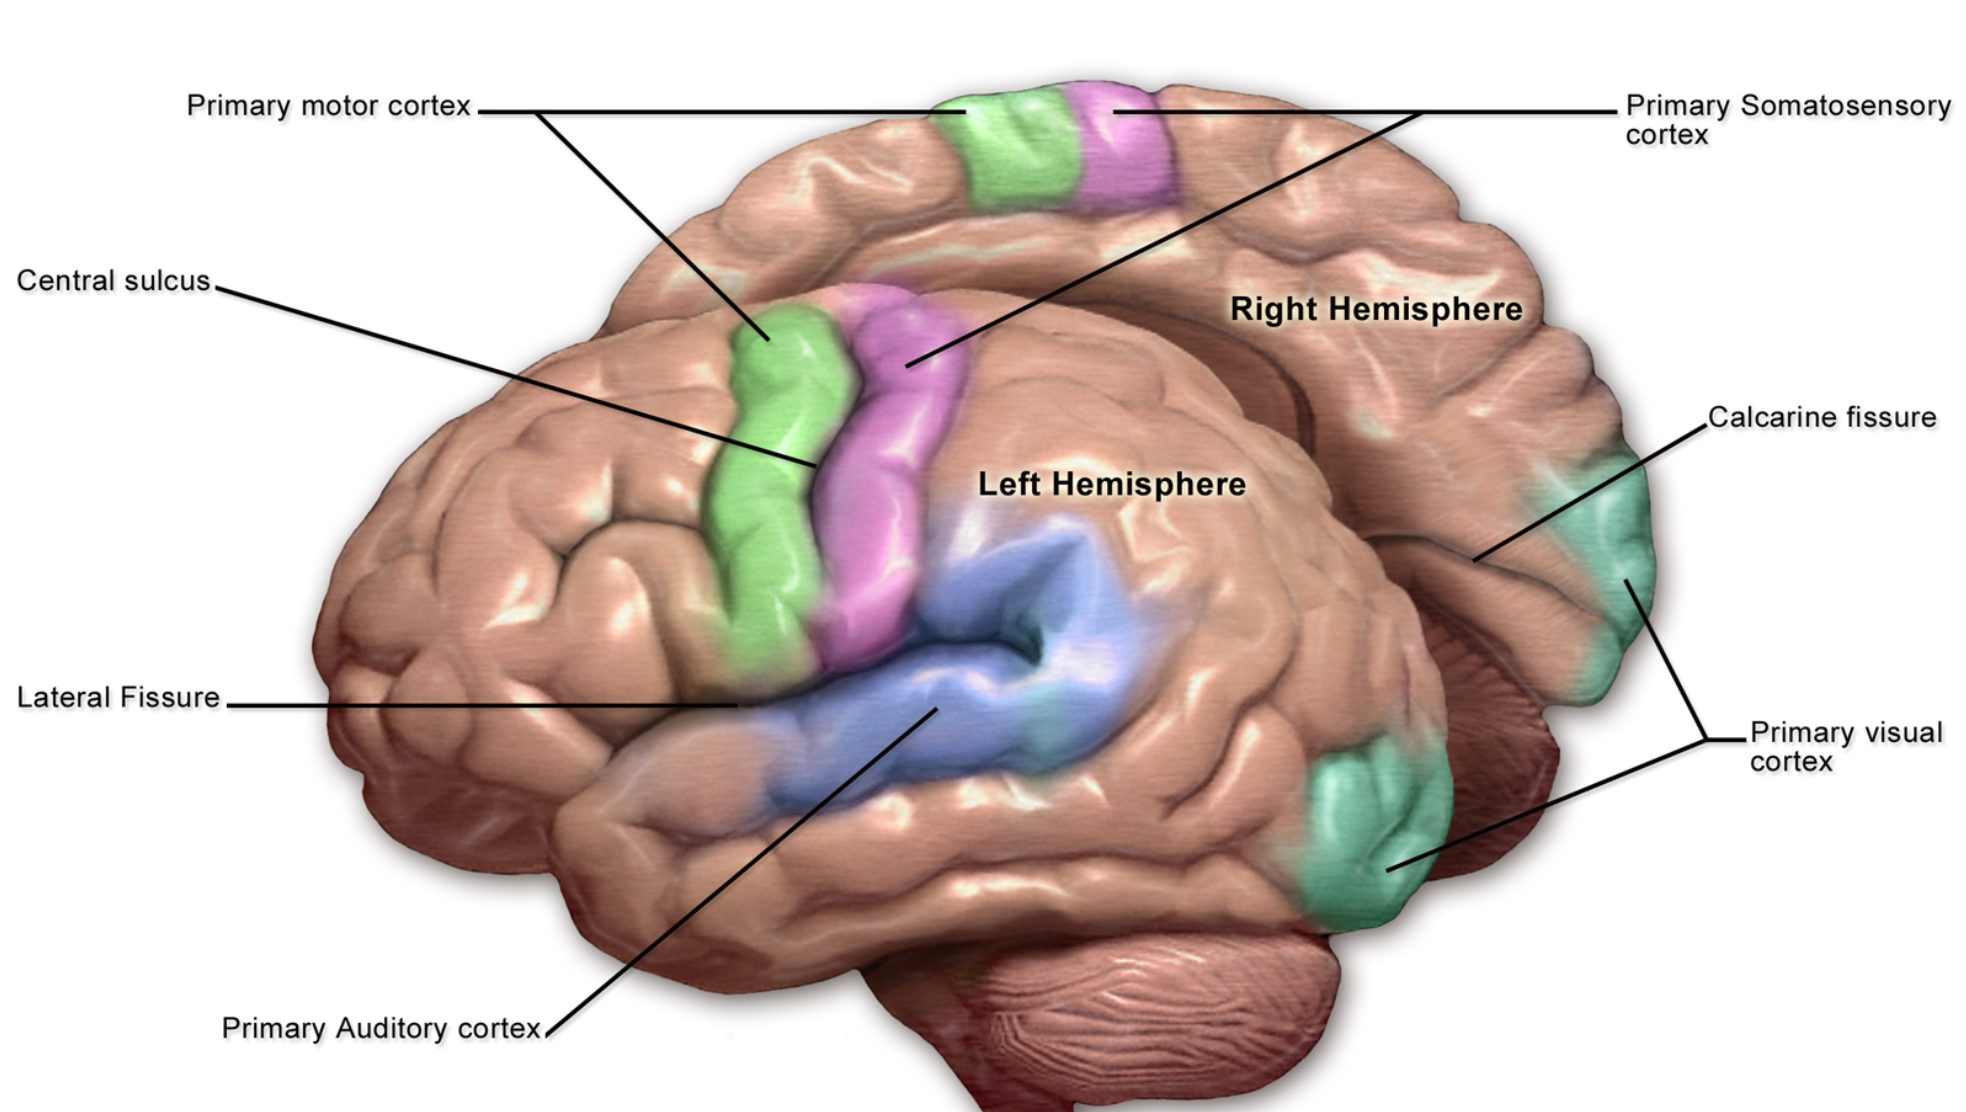 Image of the brain cortex labeled